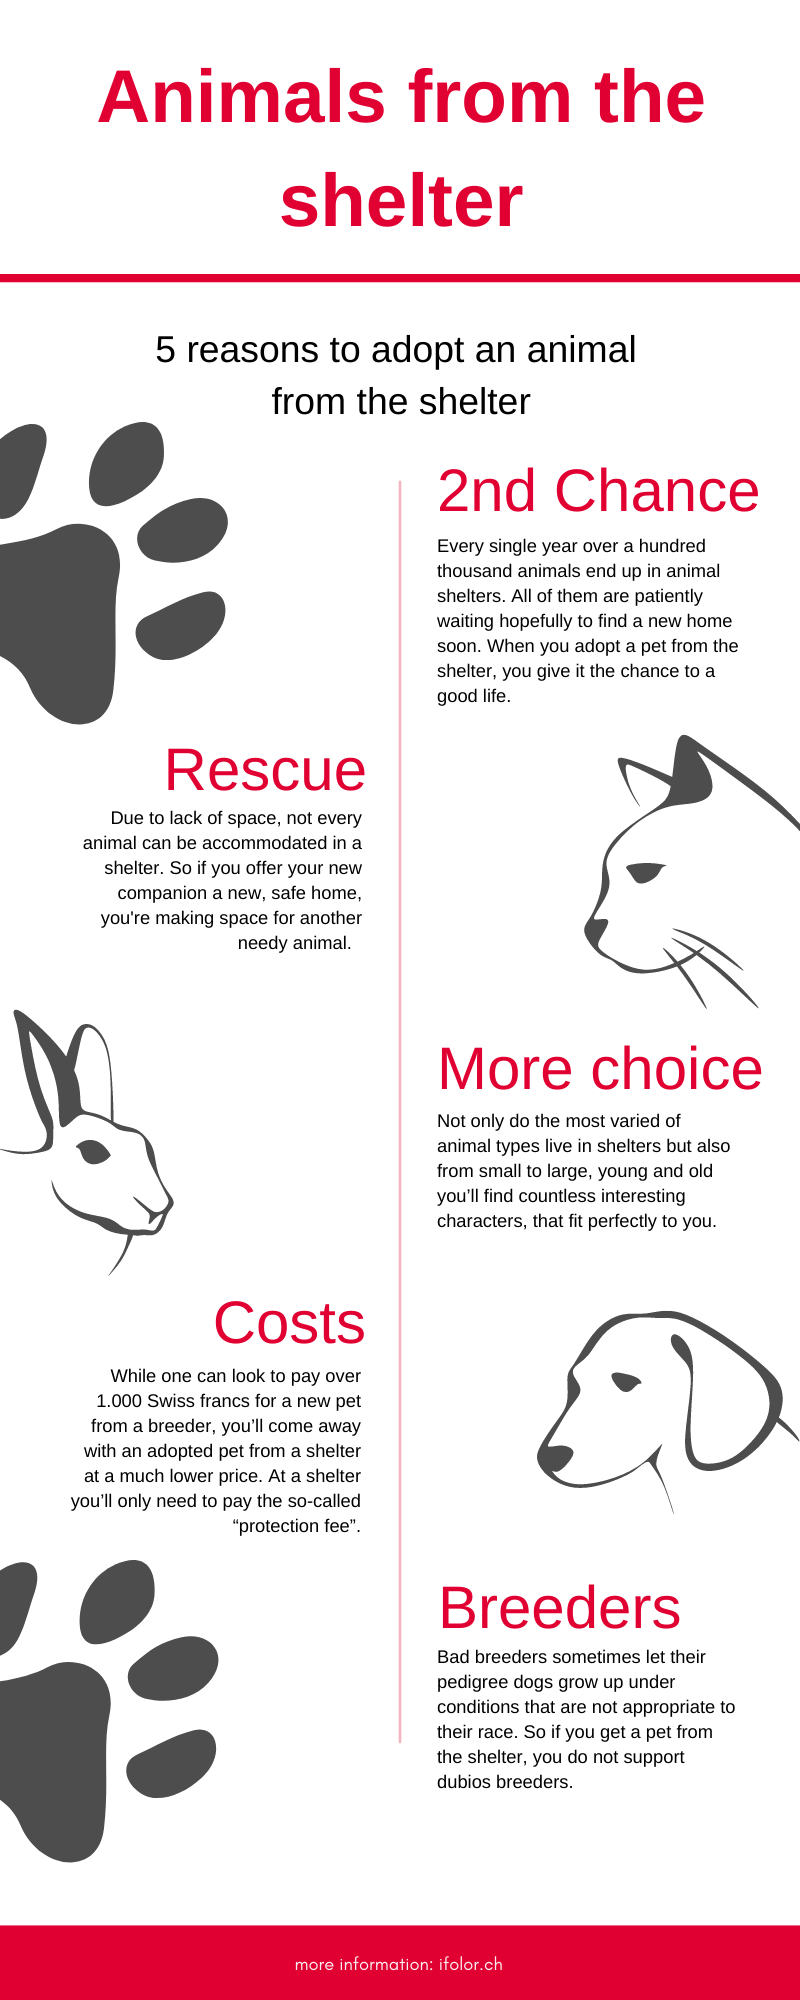 How-to: Adopting an animal from a shelter | ifolor